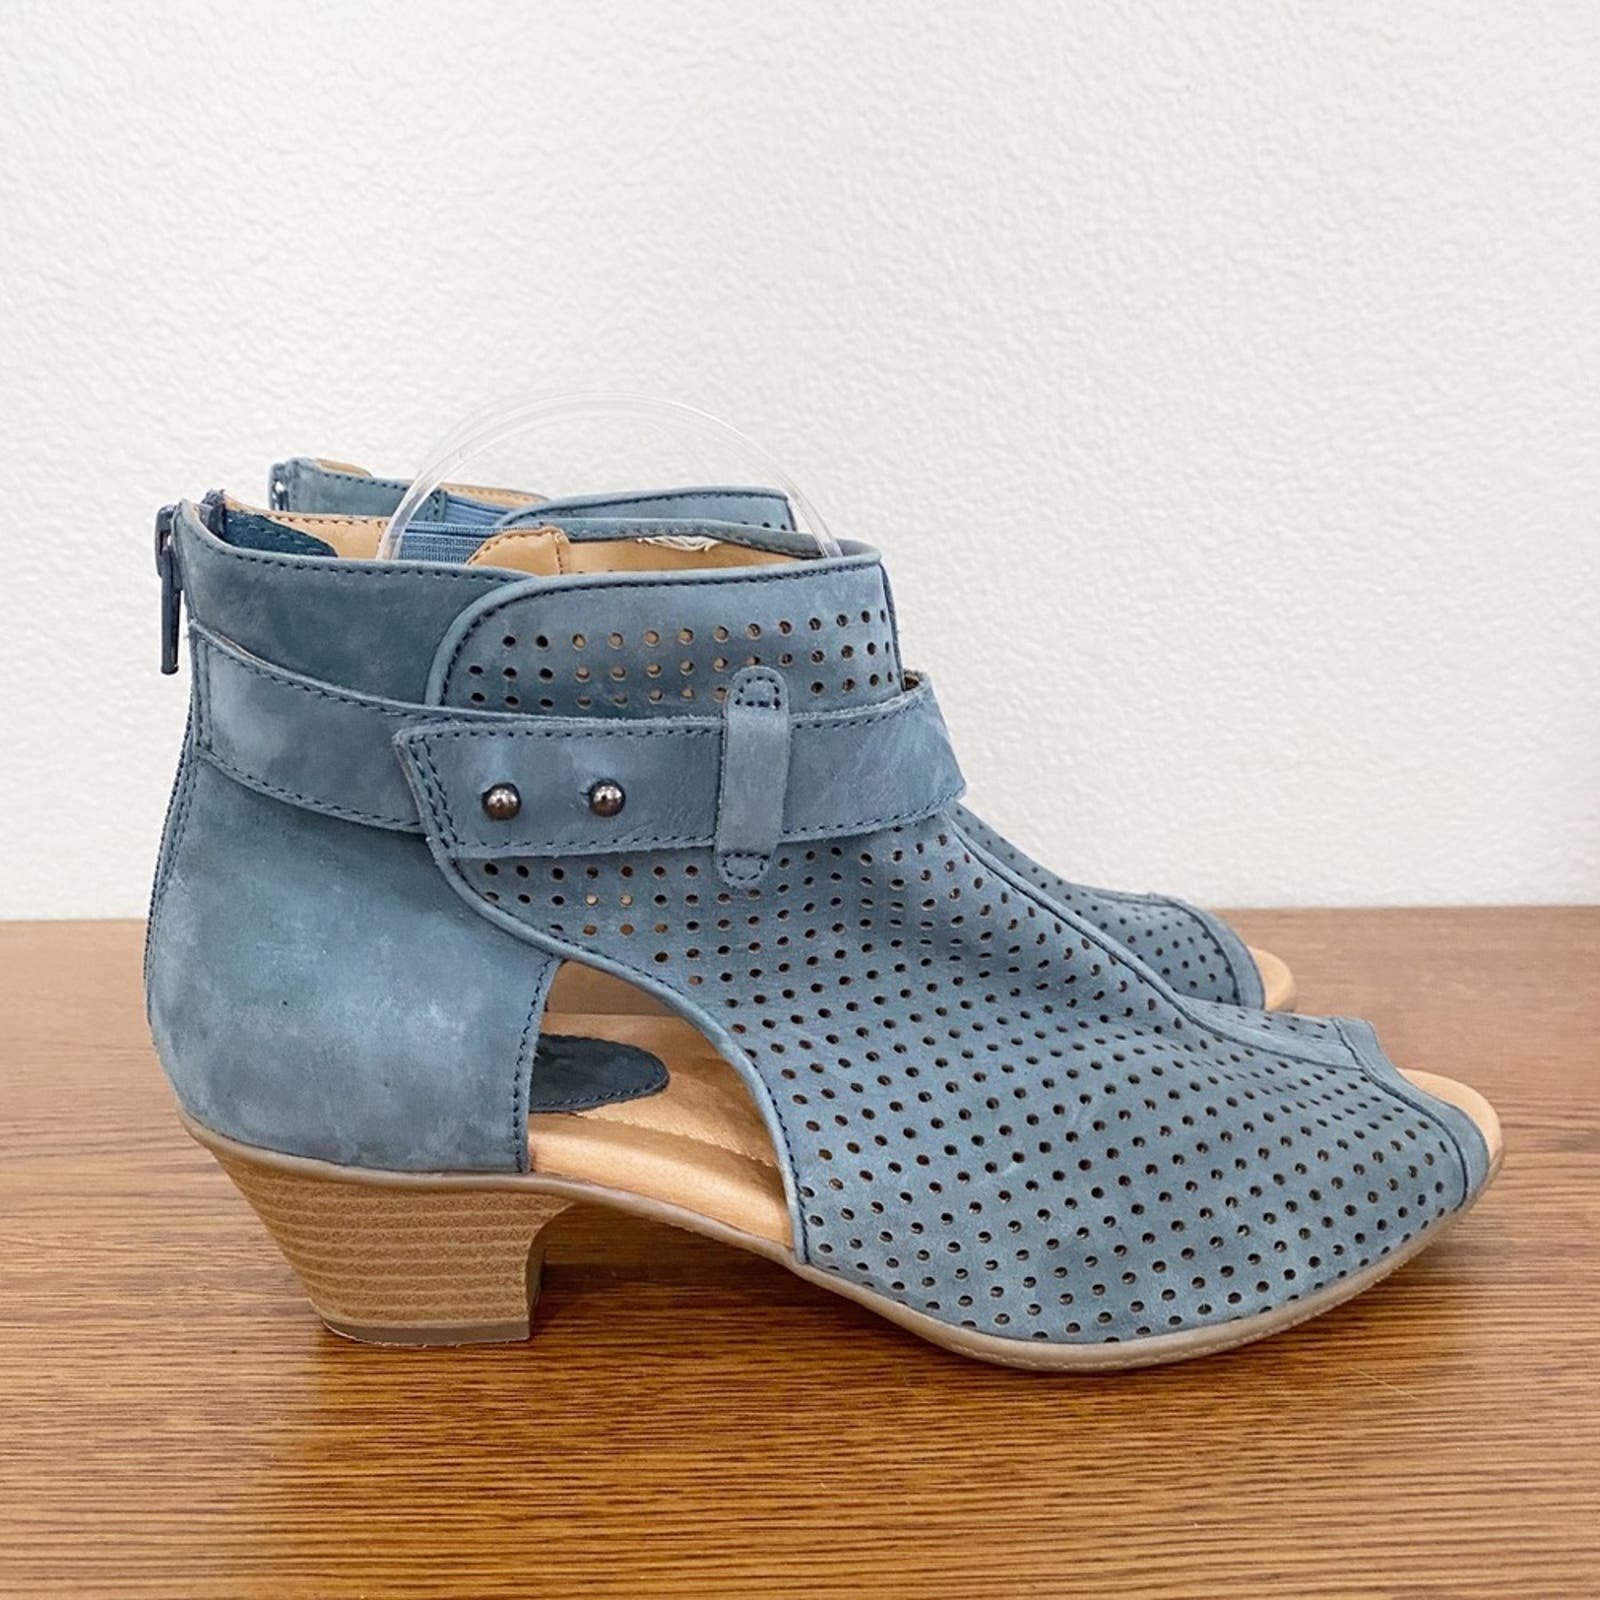 earth comfort blue perforated shoes size 9.5 BZHJTPYuC